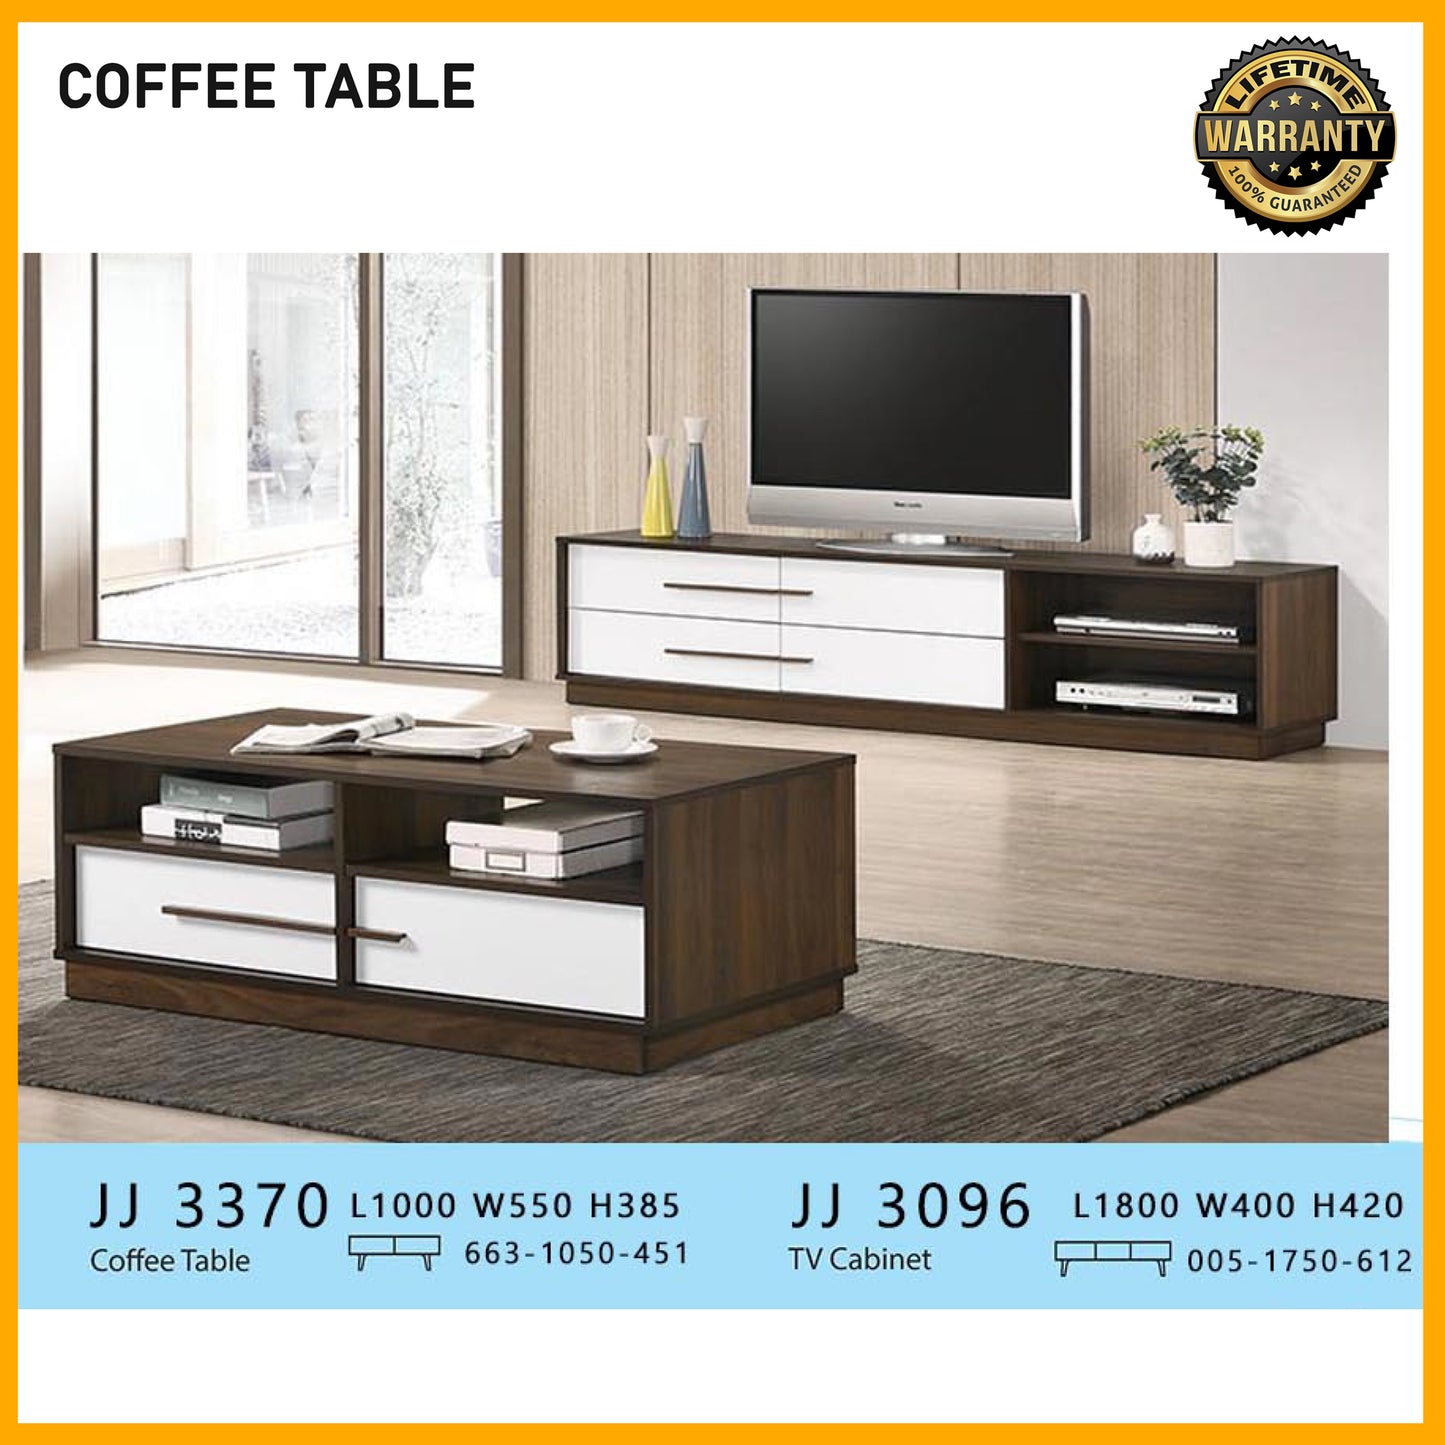 SMARTBED | Coffee Table - JJ3370